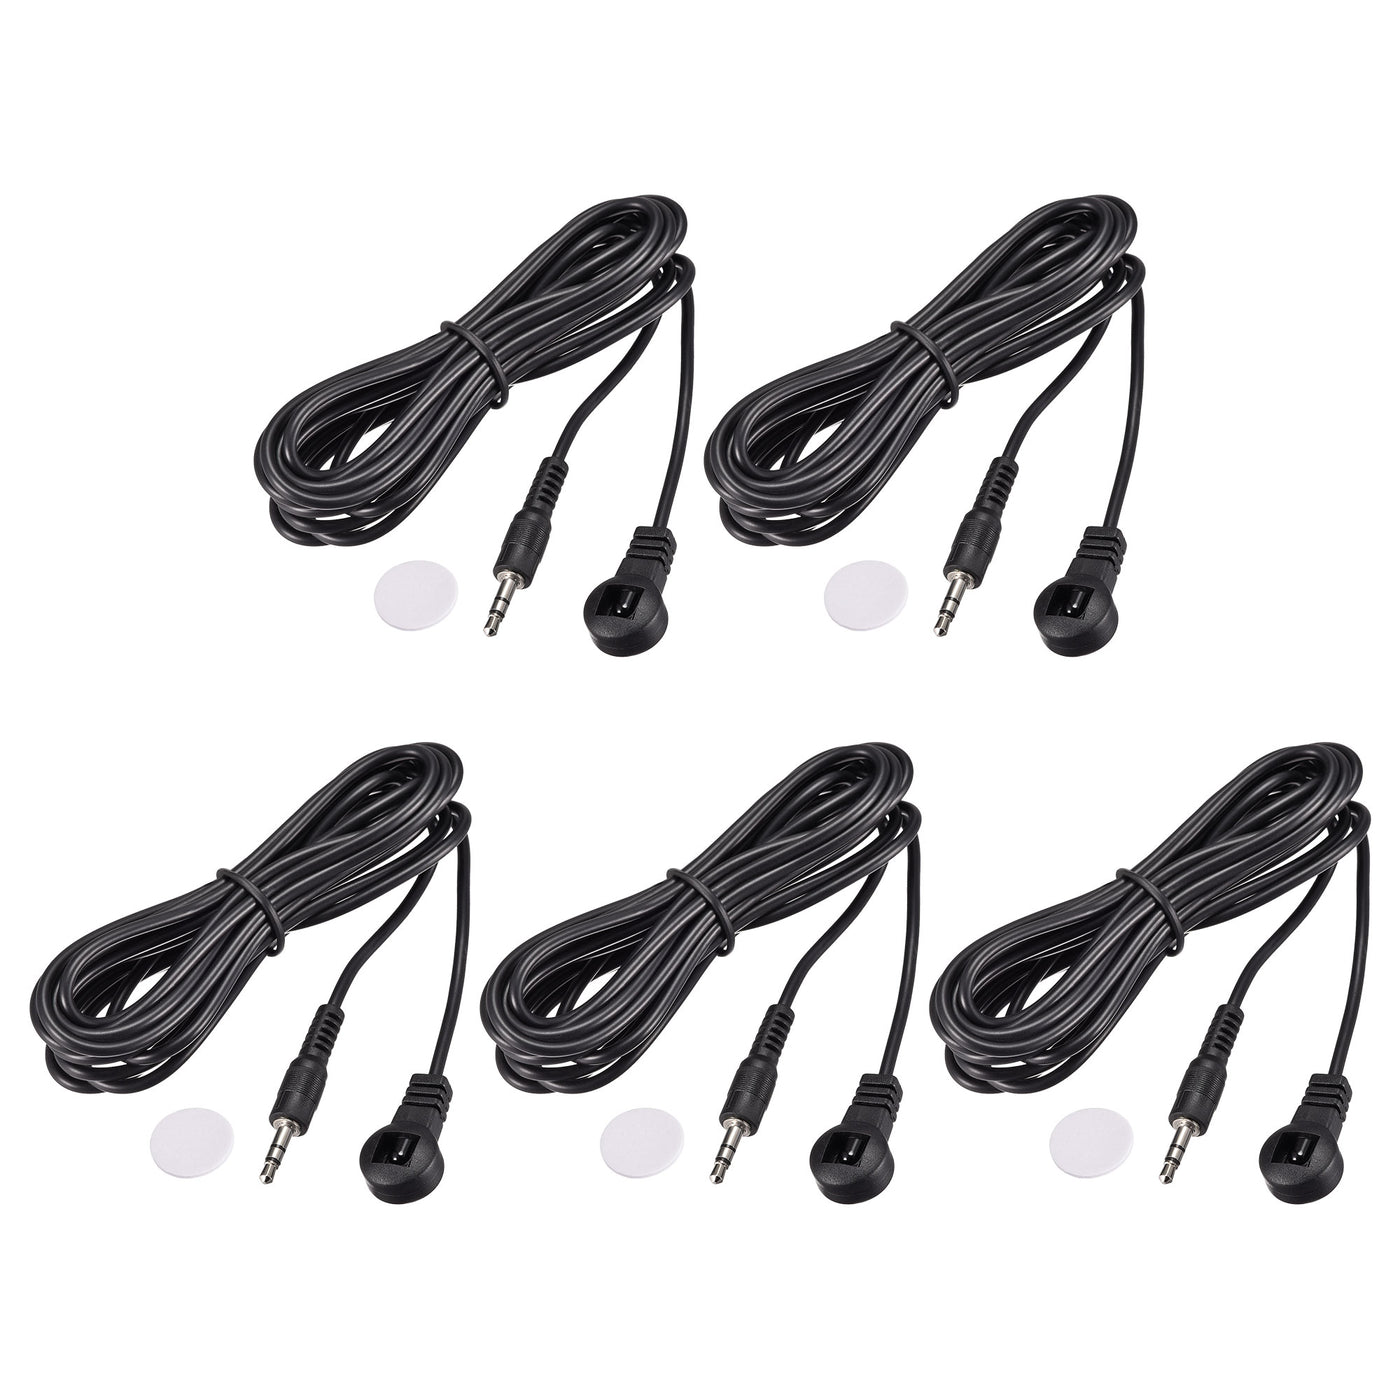 uxcell Uxcell IR Infrared Receiver Extender Cable 3.5mm Jack 9.8FT Long 26FT Receiving Distance Black Flat Head 5pcs